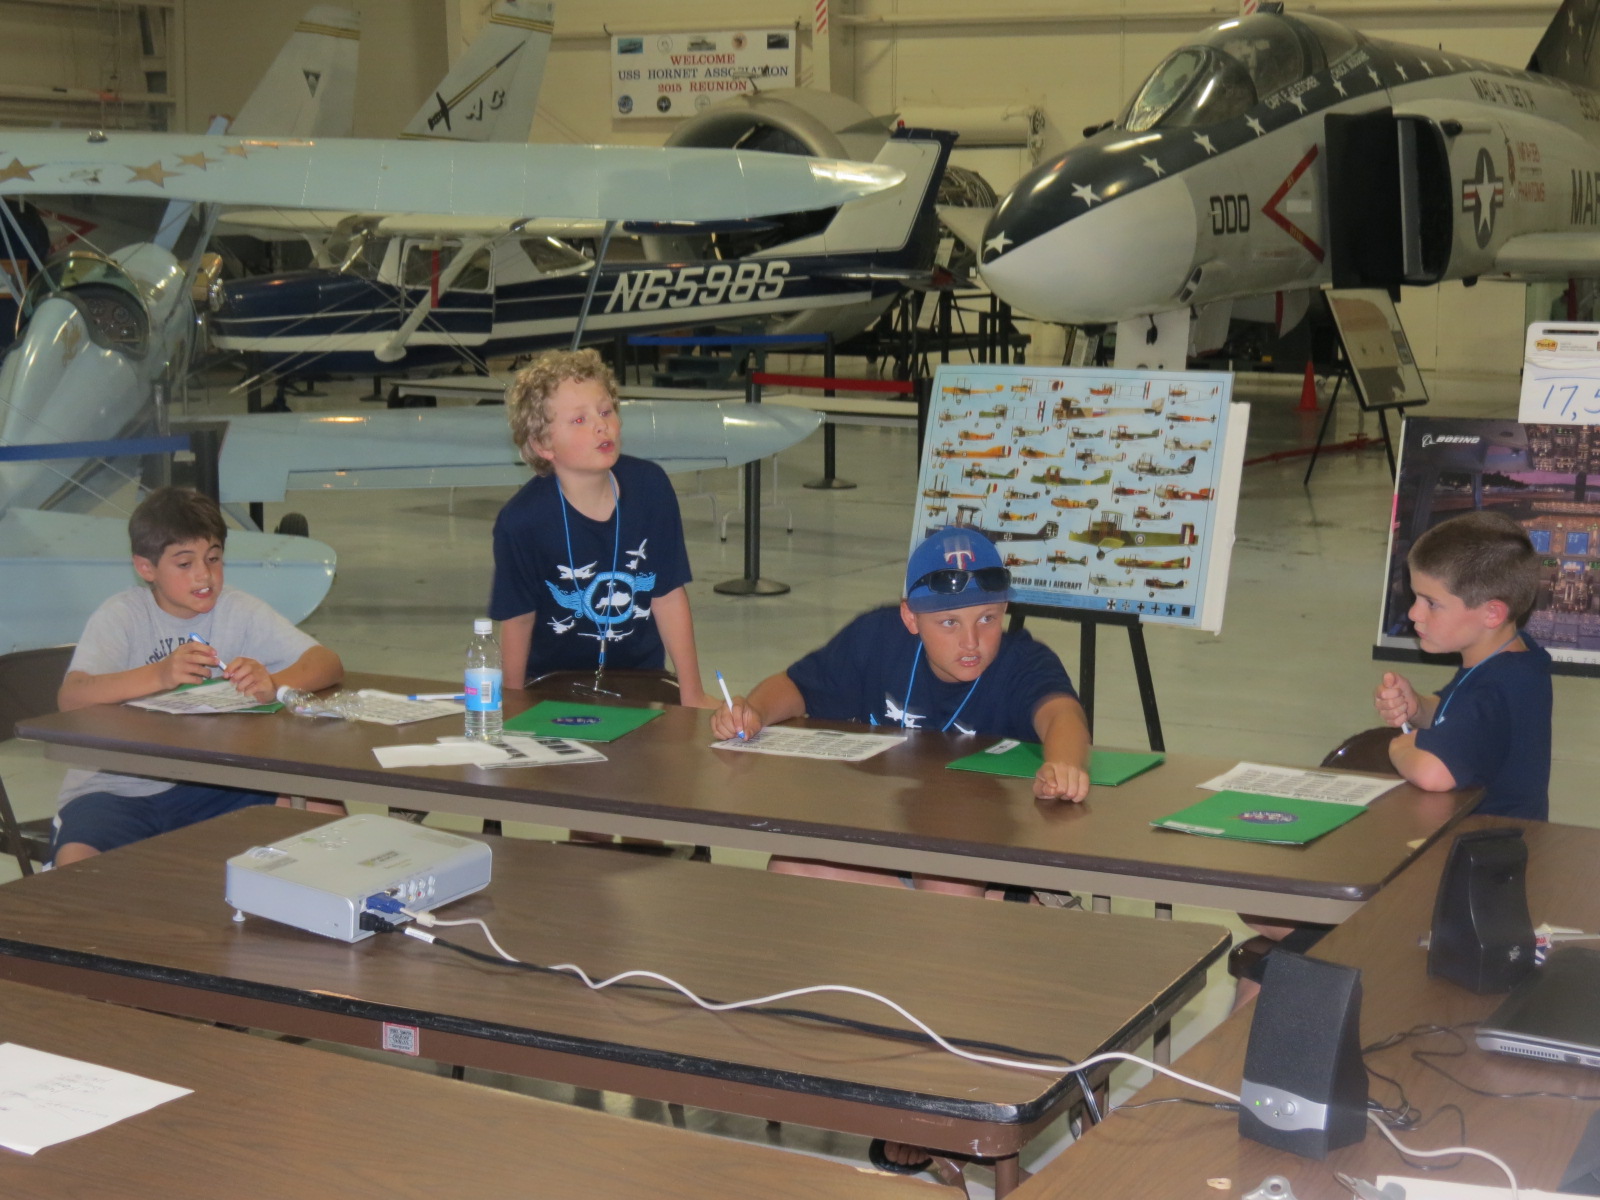 Aviation Summer Camps return to Kentucky this summer ABC 36 News